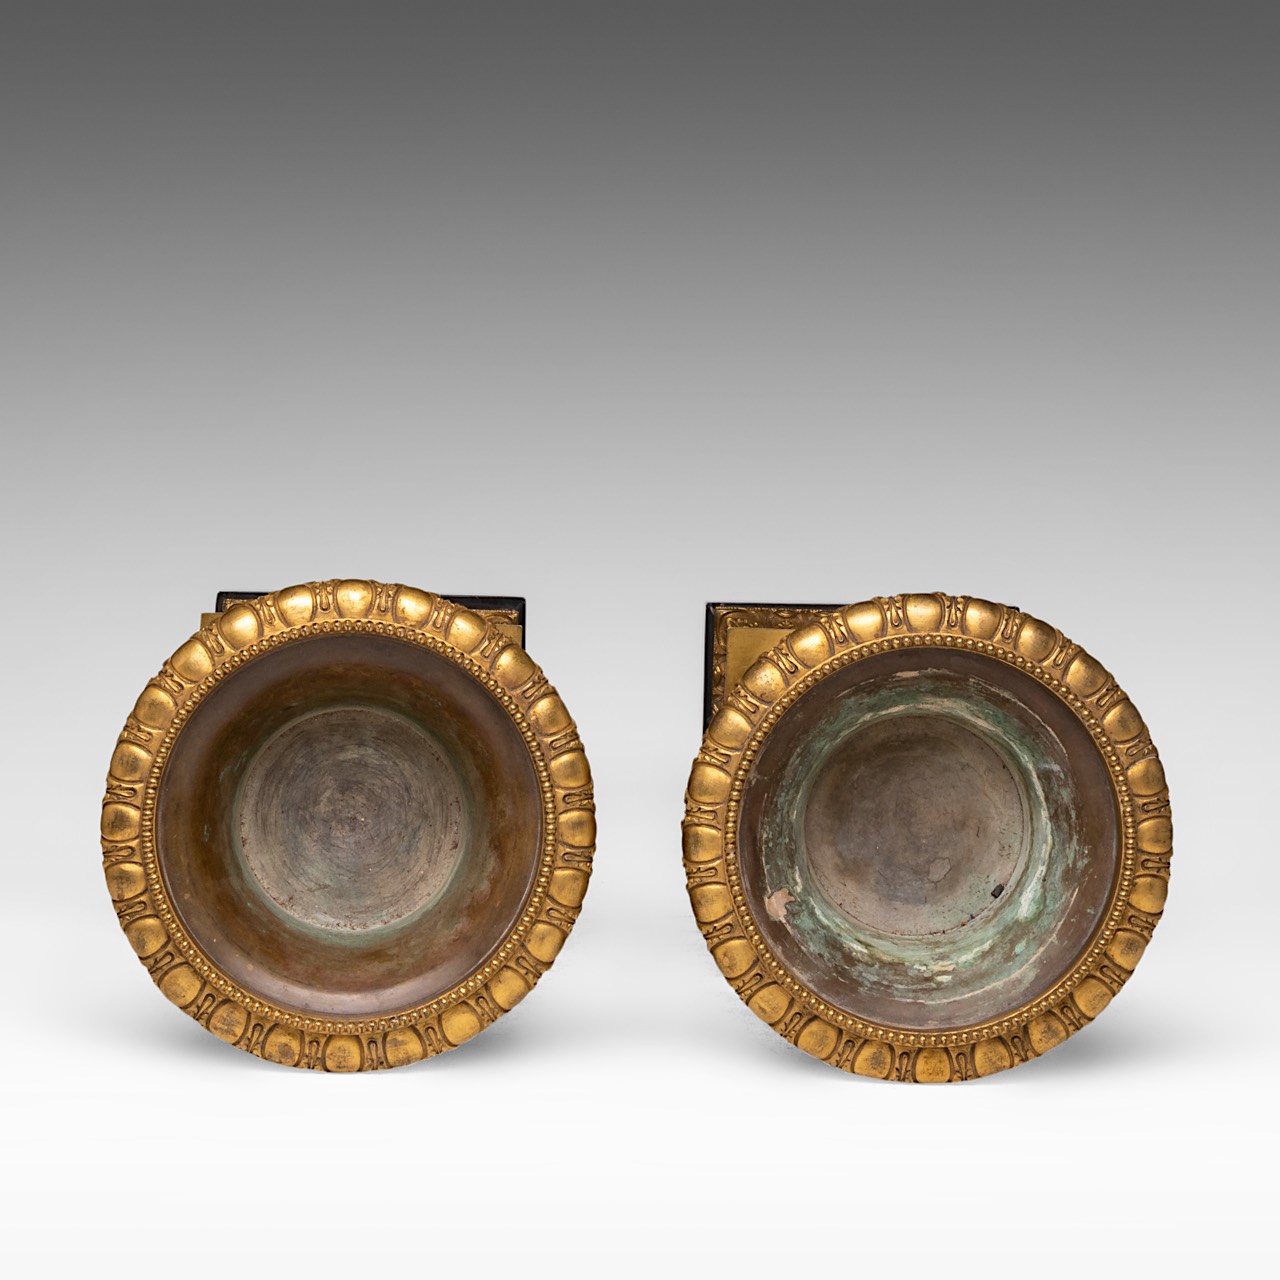 A fine pair of Neoclassical patinated and gilt bronze and black marble Medici type vases, H 45 cm - Image 5 of 5